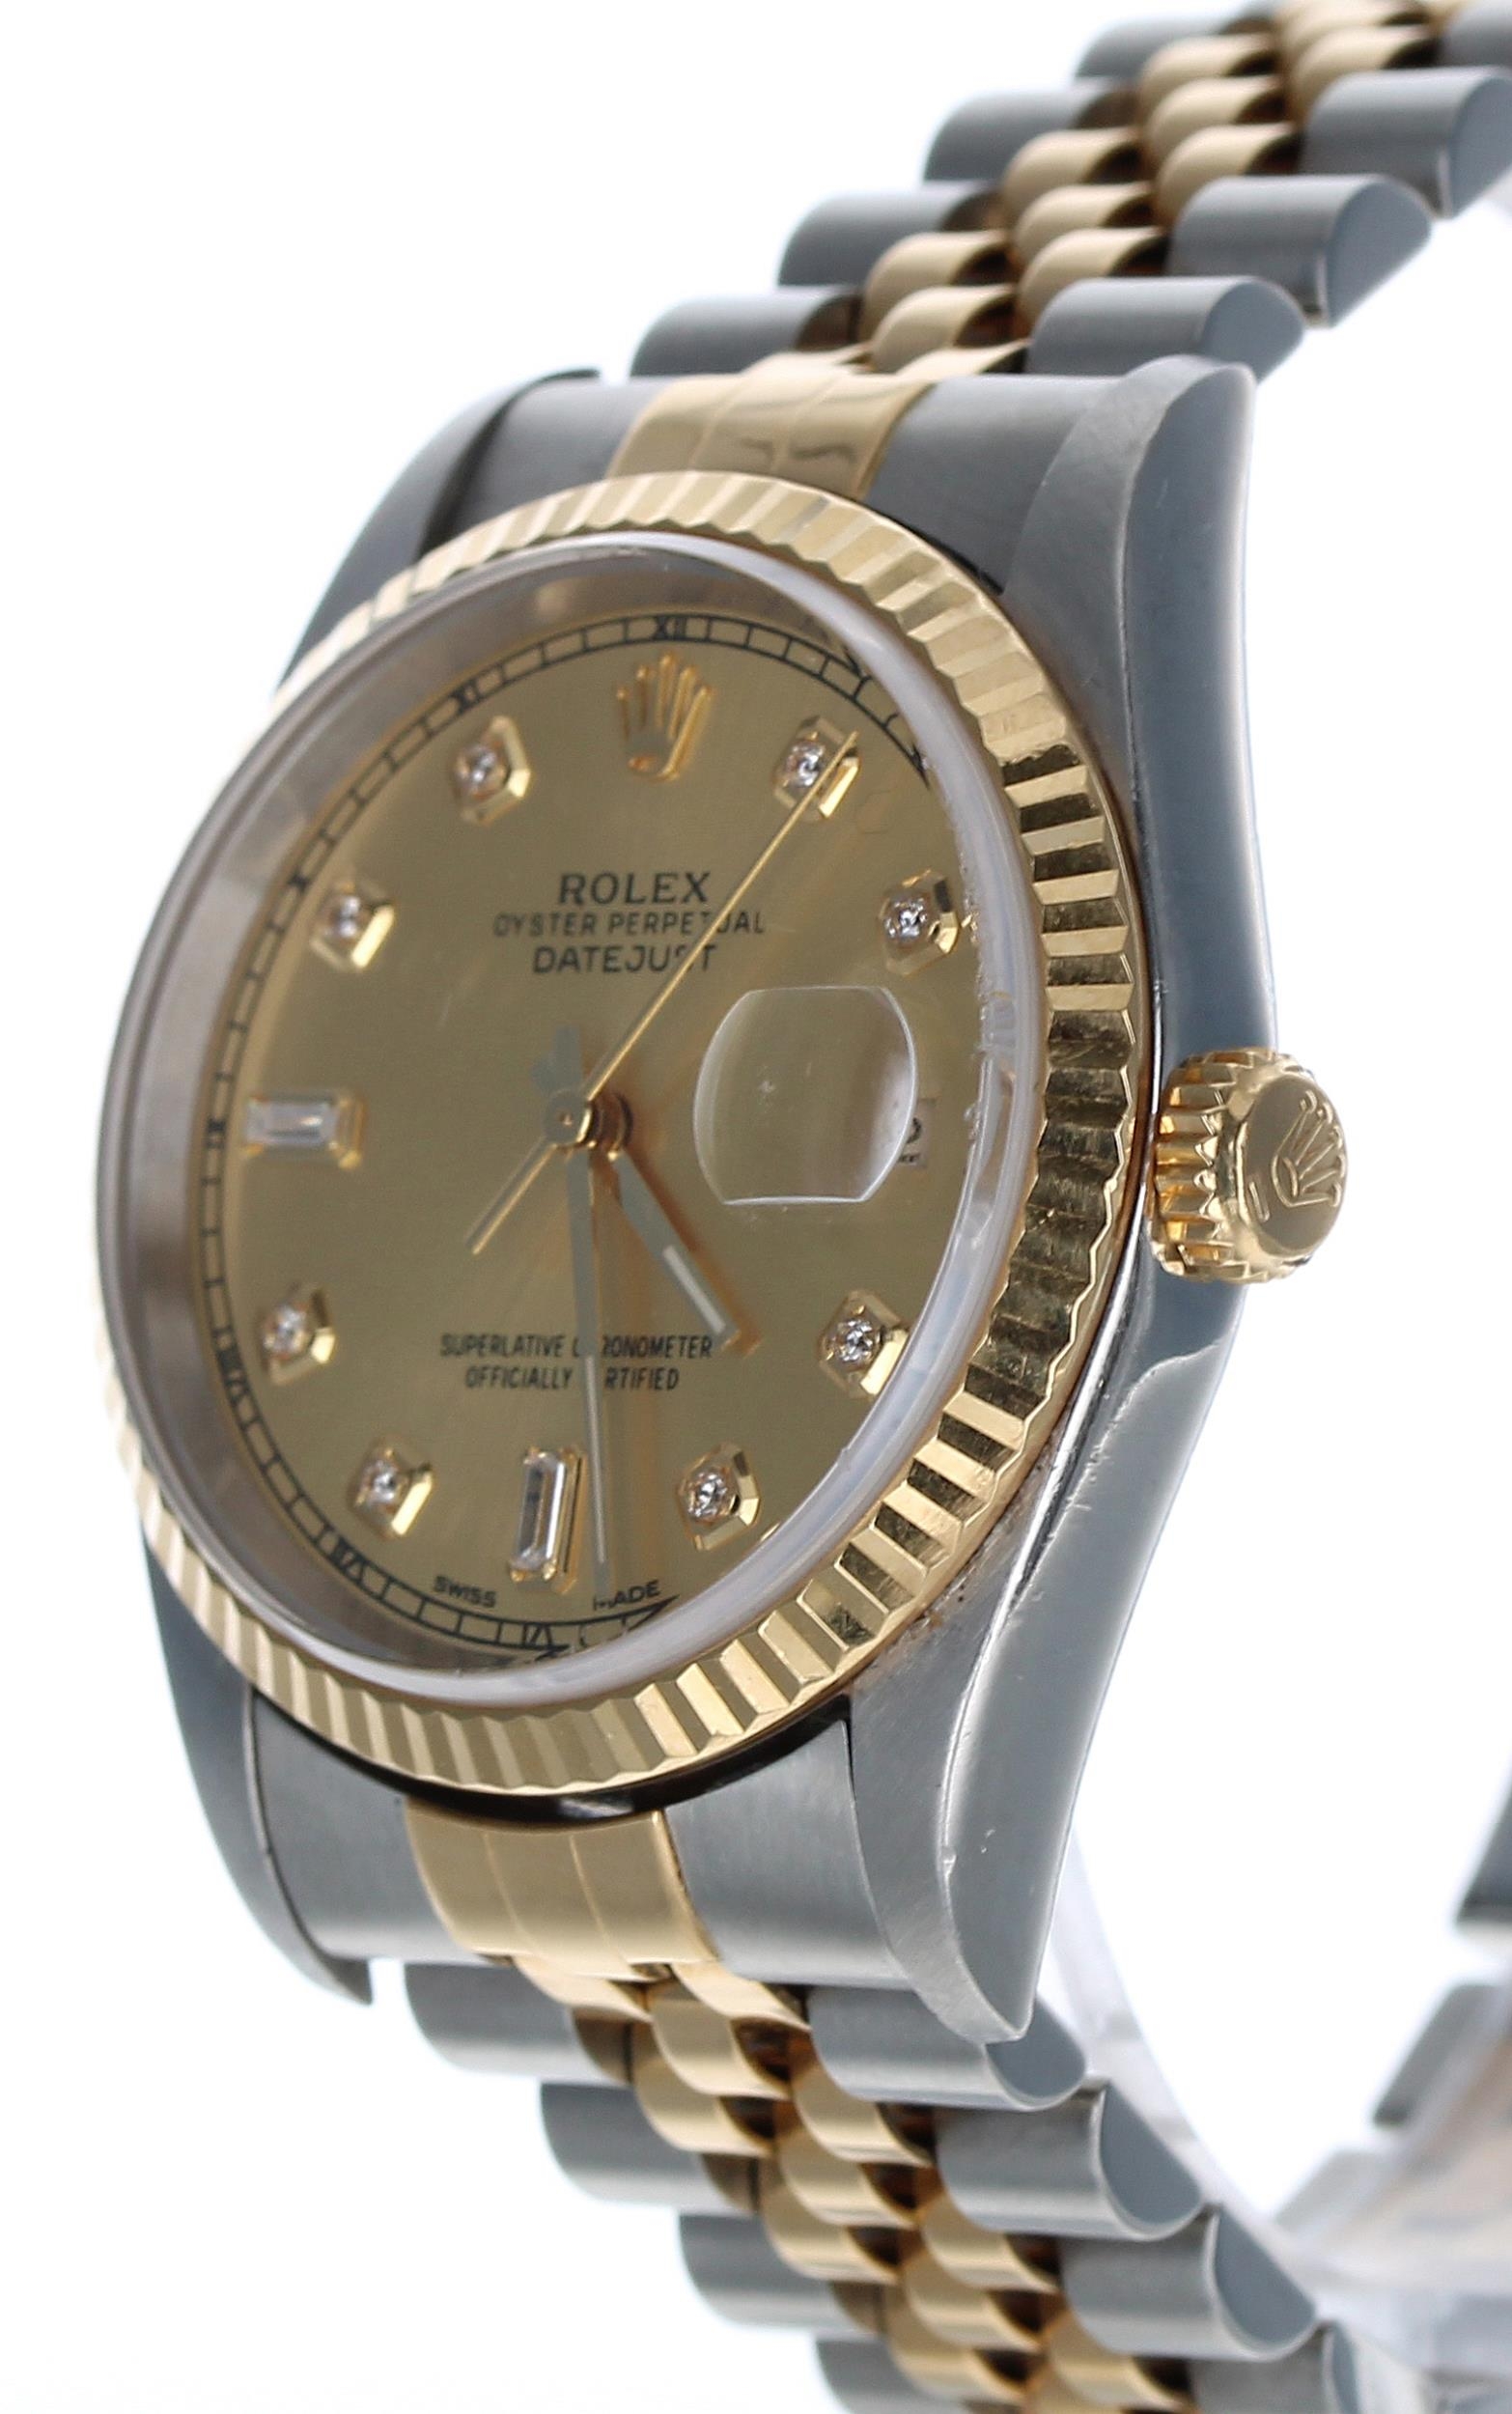 Rolex Oyster Perpetual Datejust stainless steel and gold gentleman's wristwatch, reference no. - Image 2 of 5